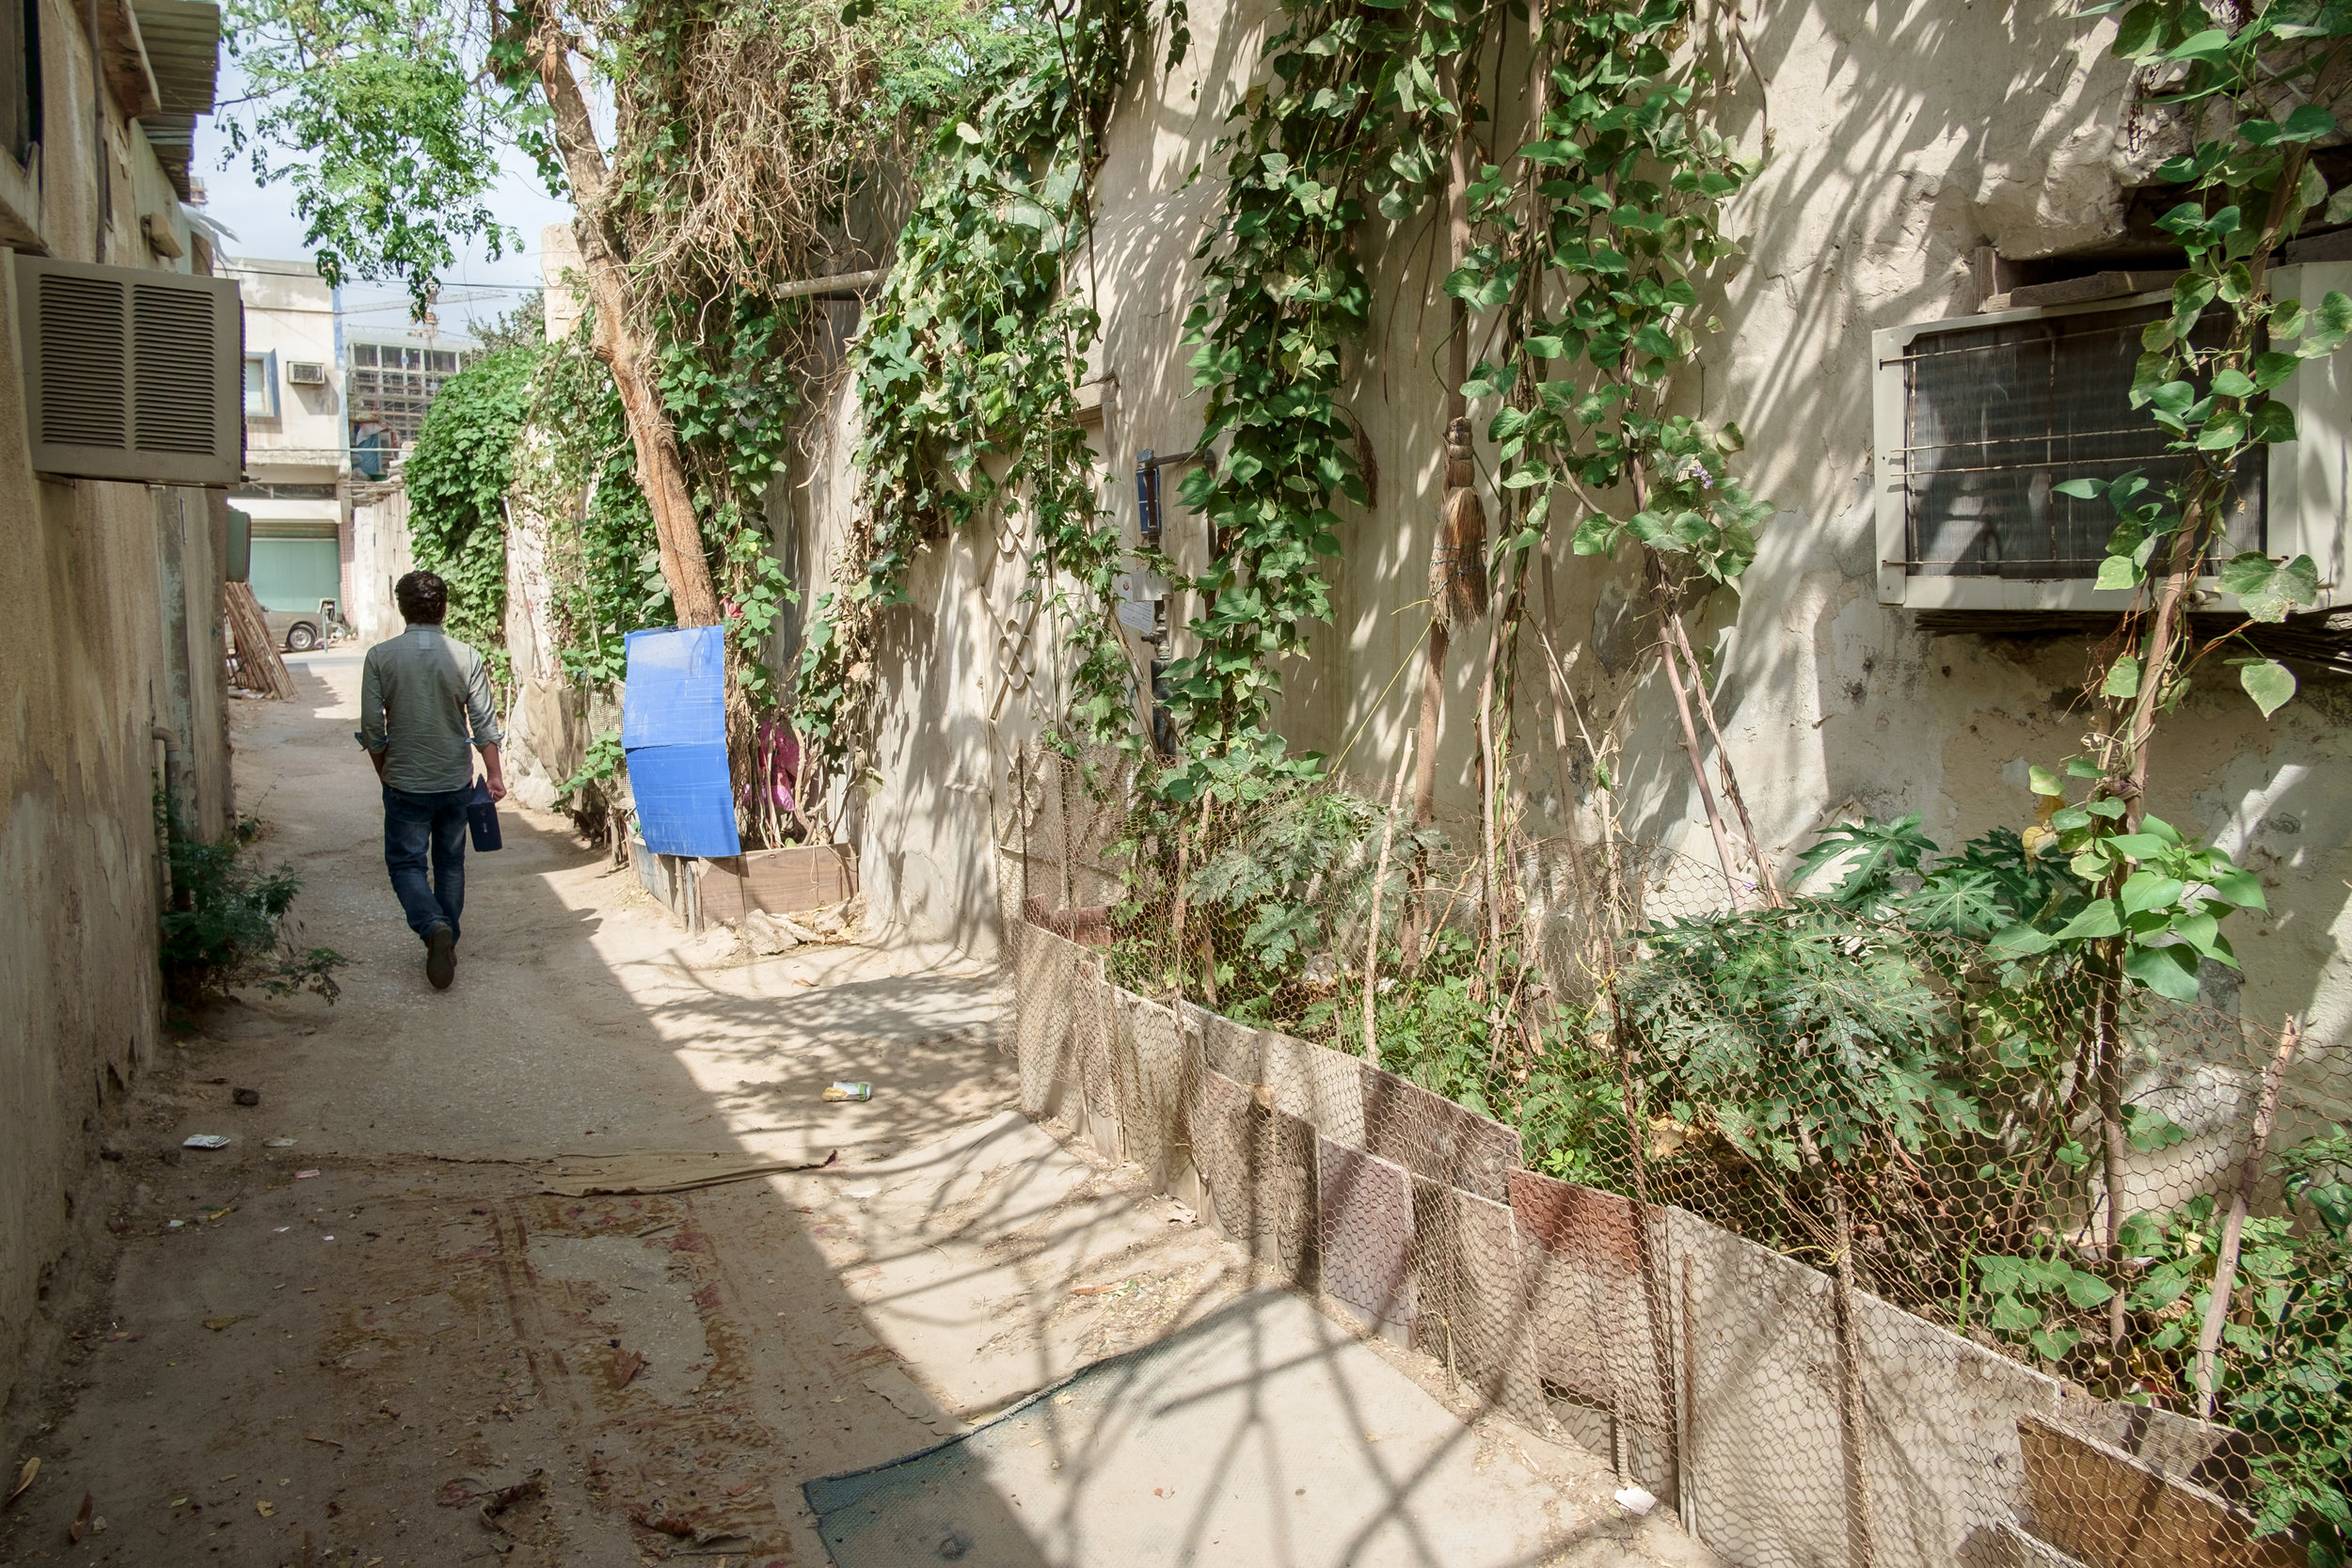  A scene of one of the back streets of the old Musheireb neighborhood in Doha. Much of this neighborhood has been torn down, and the residents forcibly removed, in order to build the New Msheireb development. Qatar is in a race to revitalize and mode